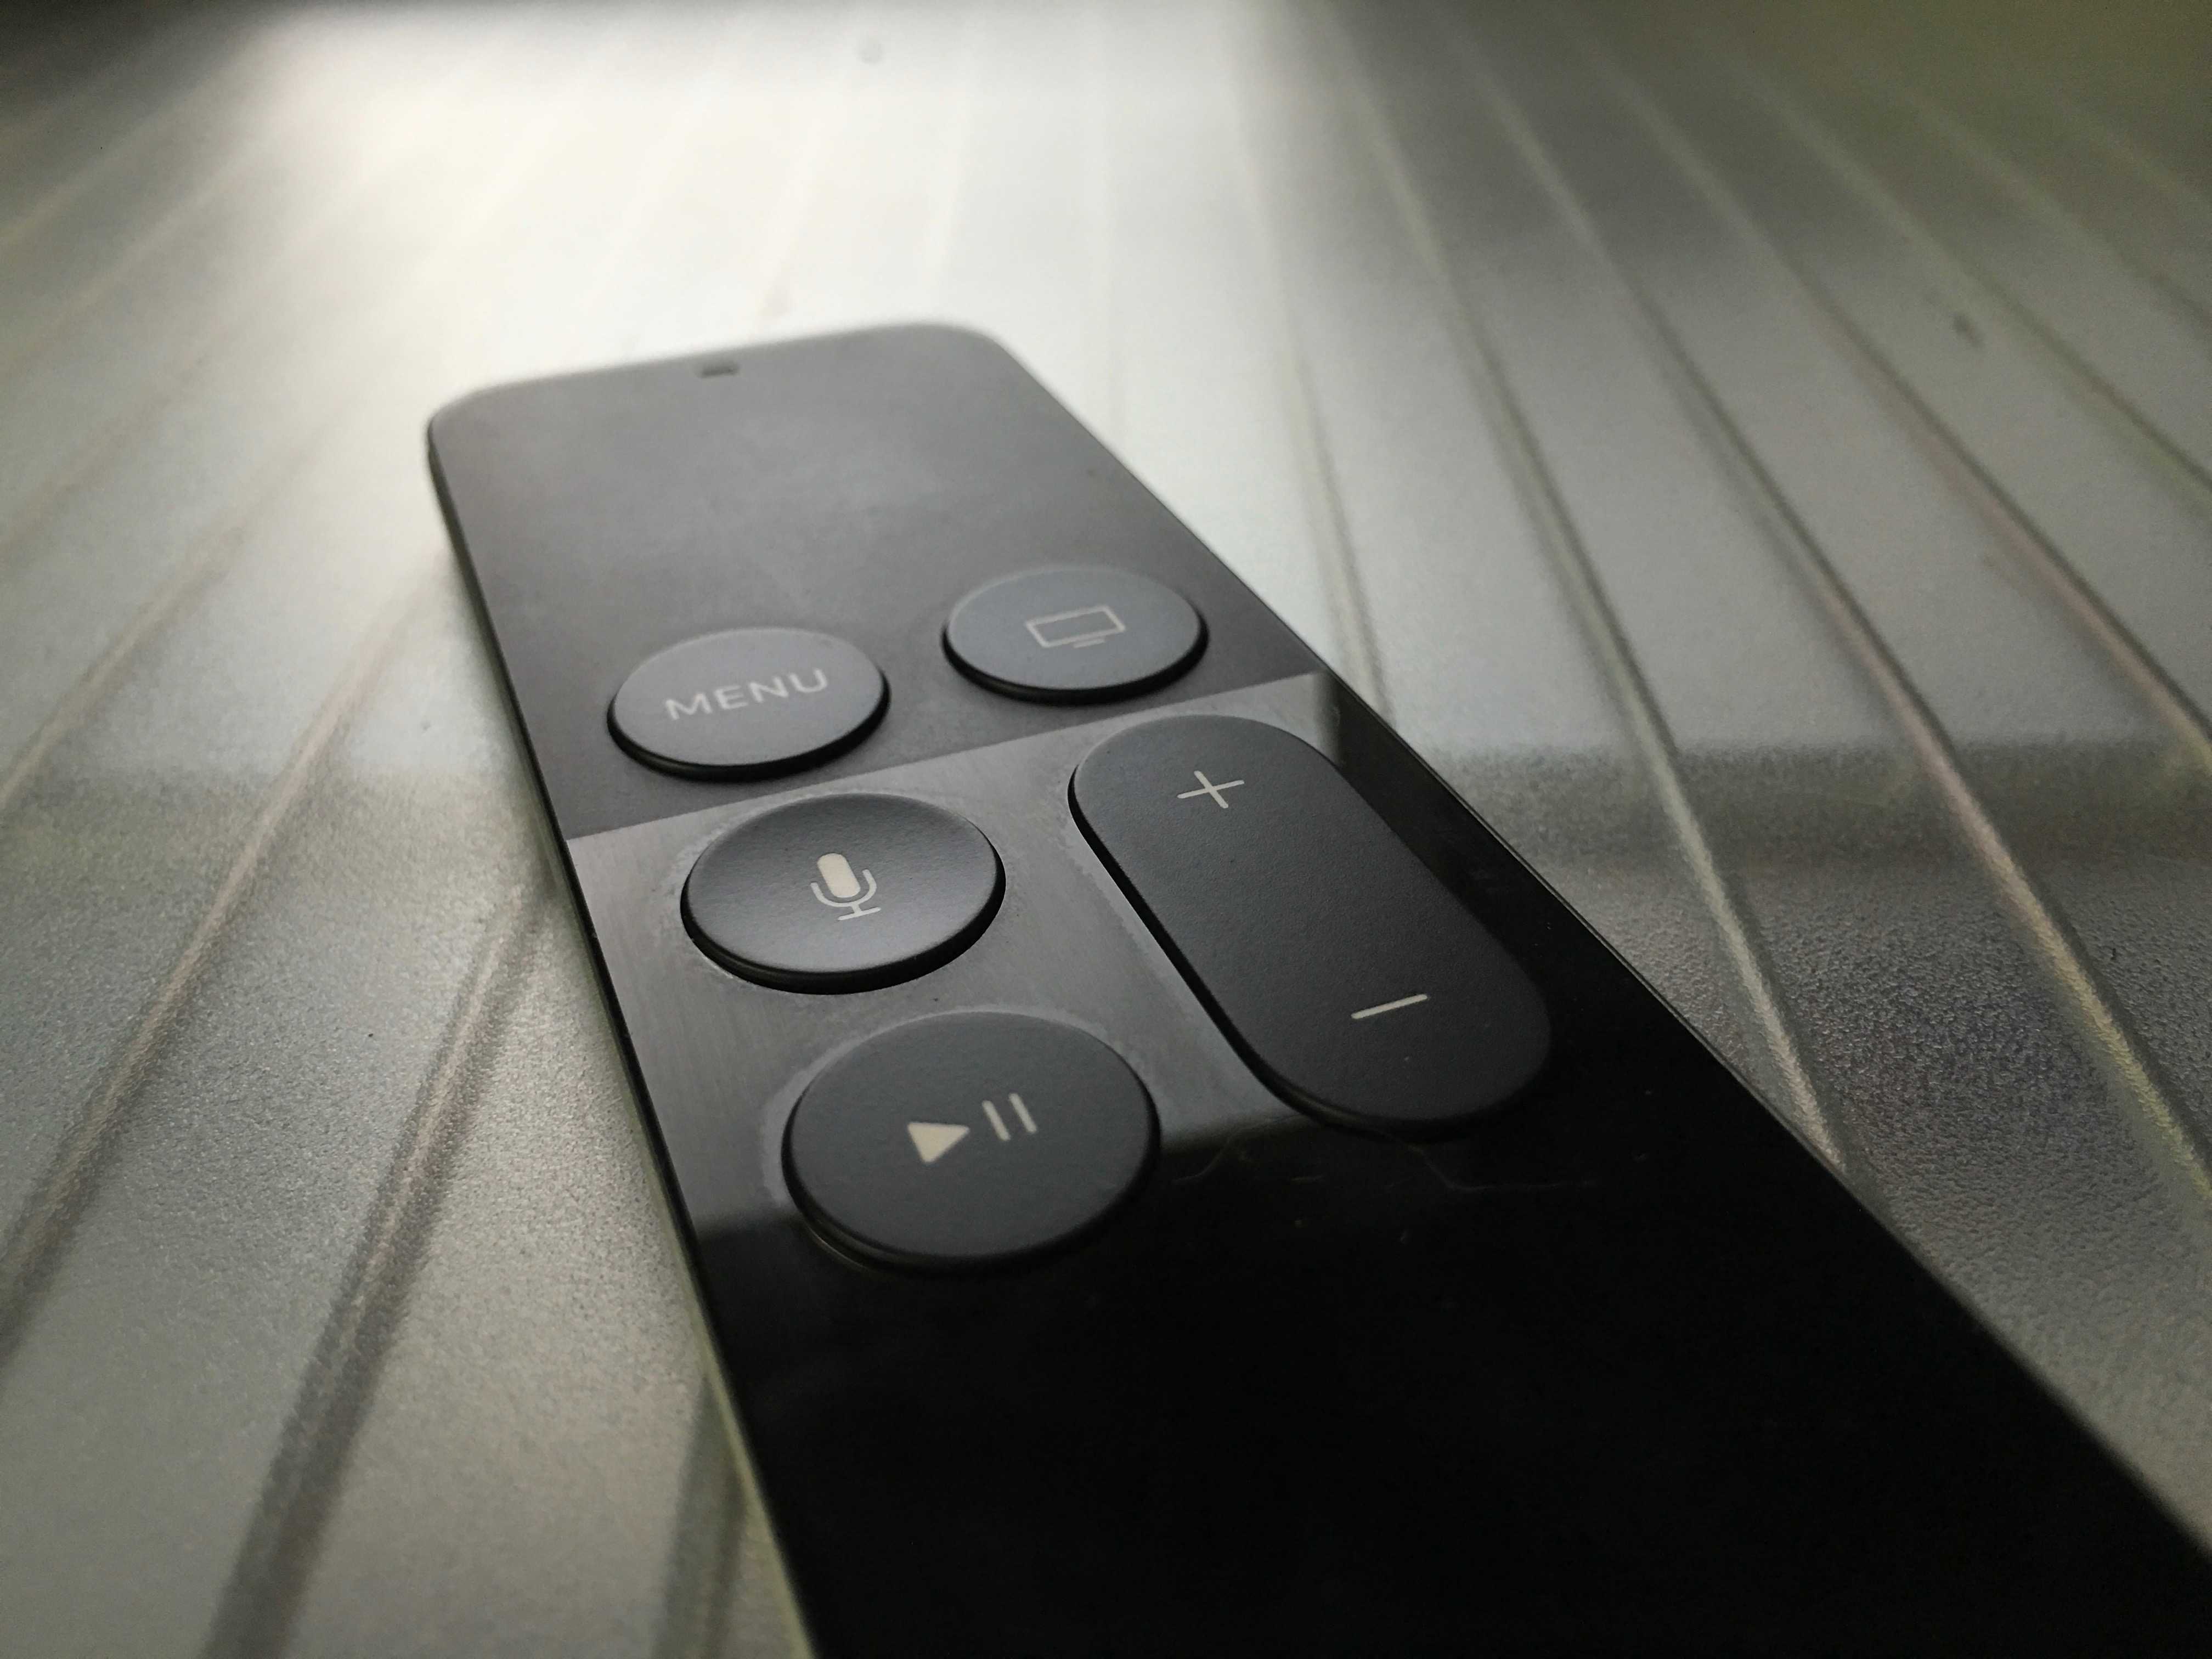 Siri can now surface Disney content on your Apple TV.